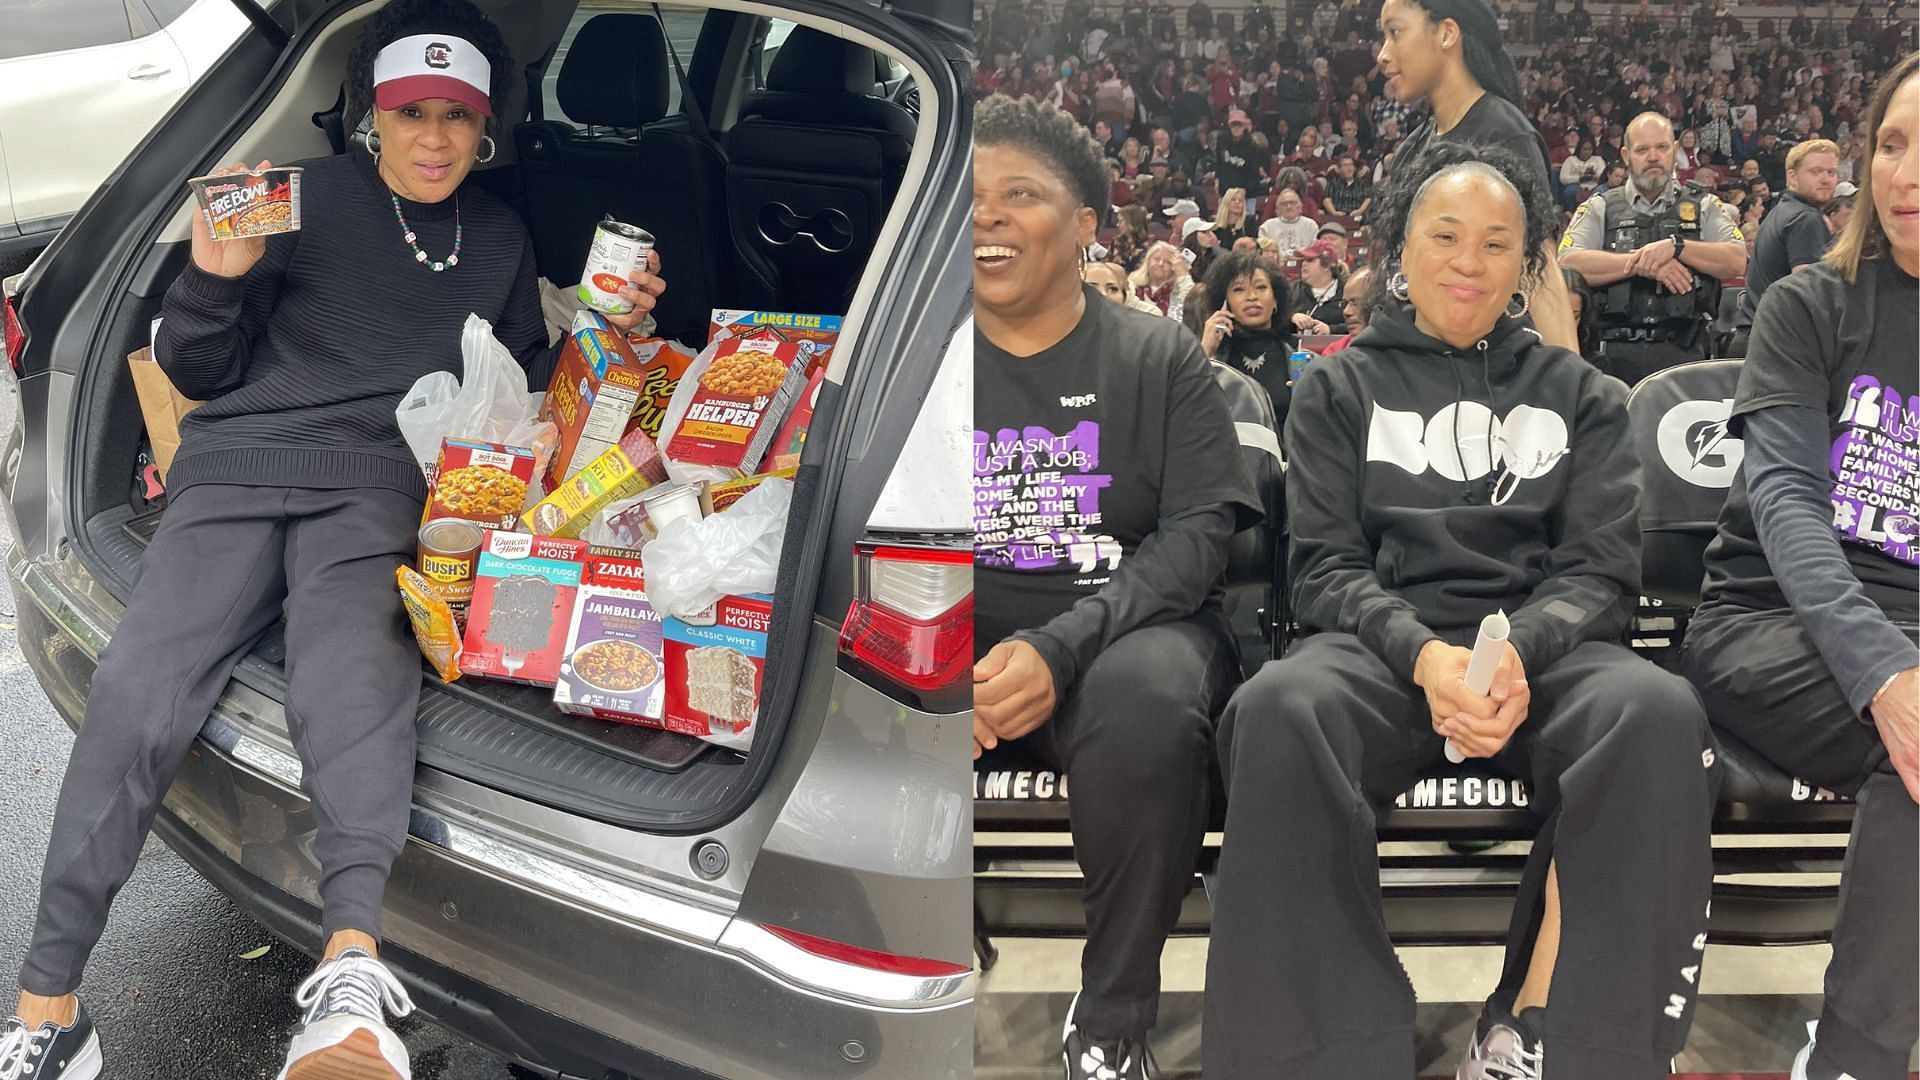 Dawn Staley is ready to win some more games